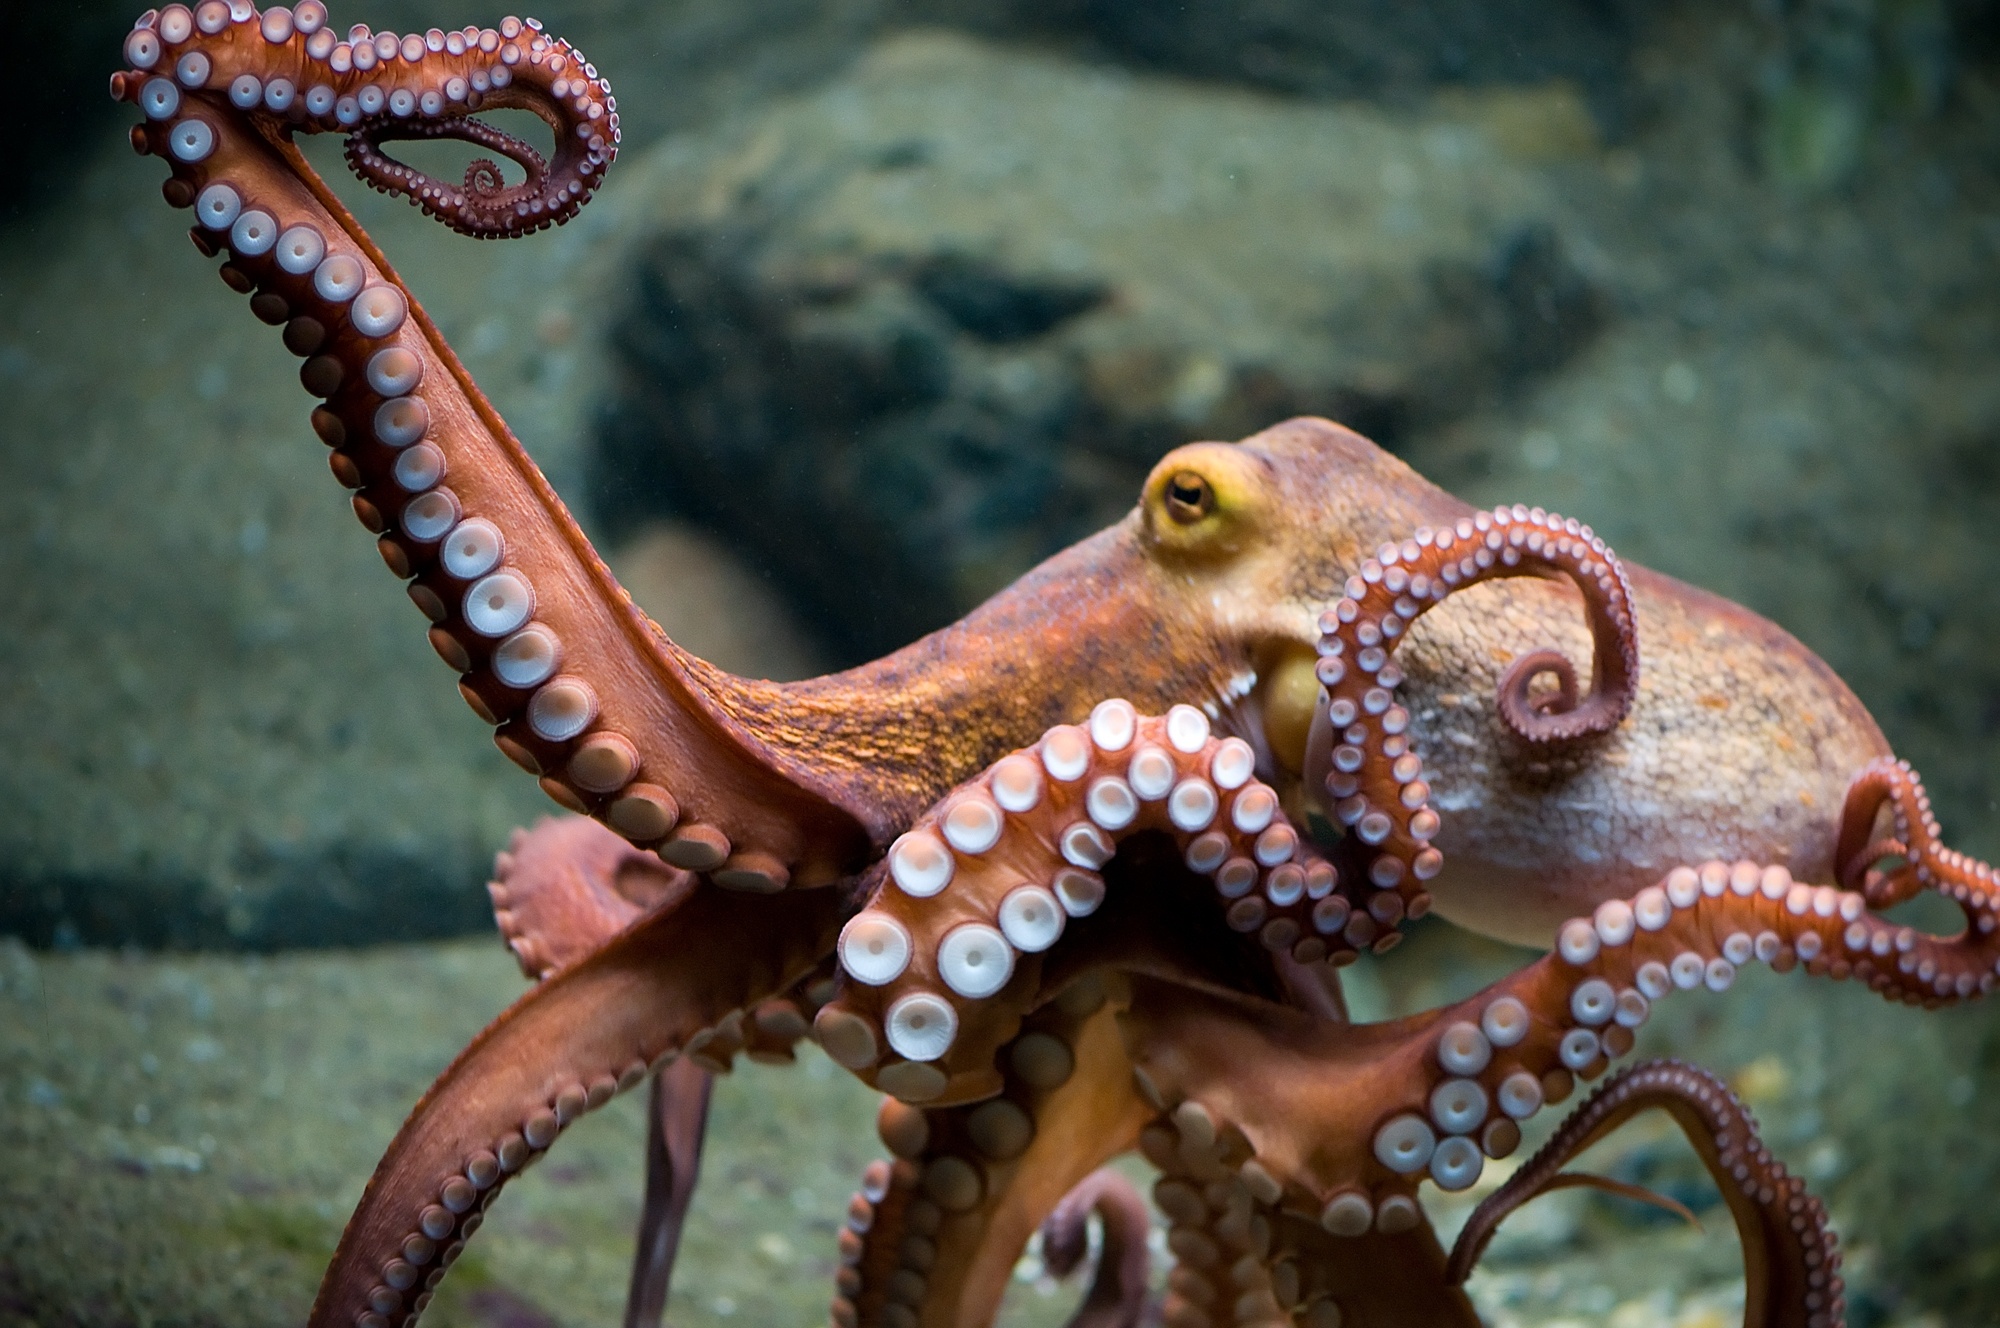 HD octopus wallpapers, Stunning cephalopod images, Captivating wallpaper collection, Sea creature beauty, 2000x1330 HD Desktop